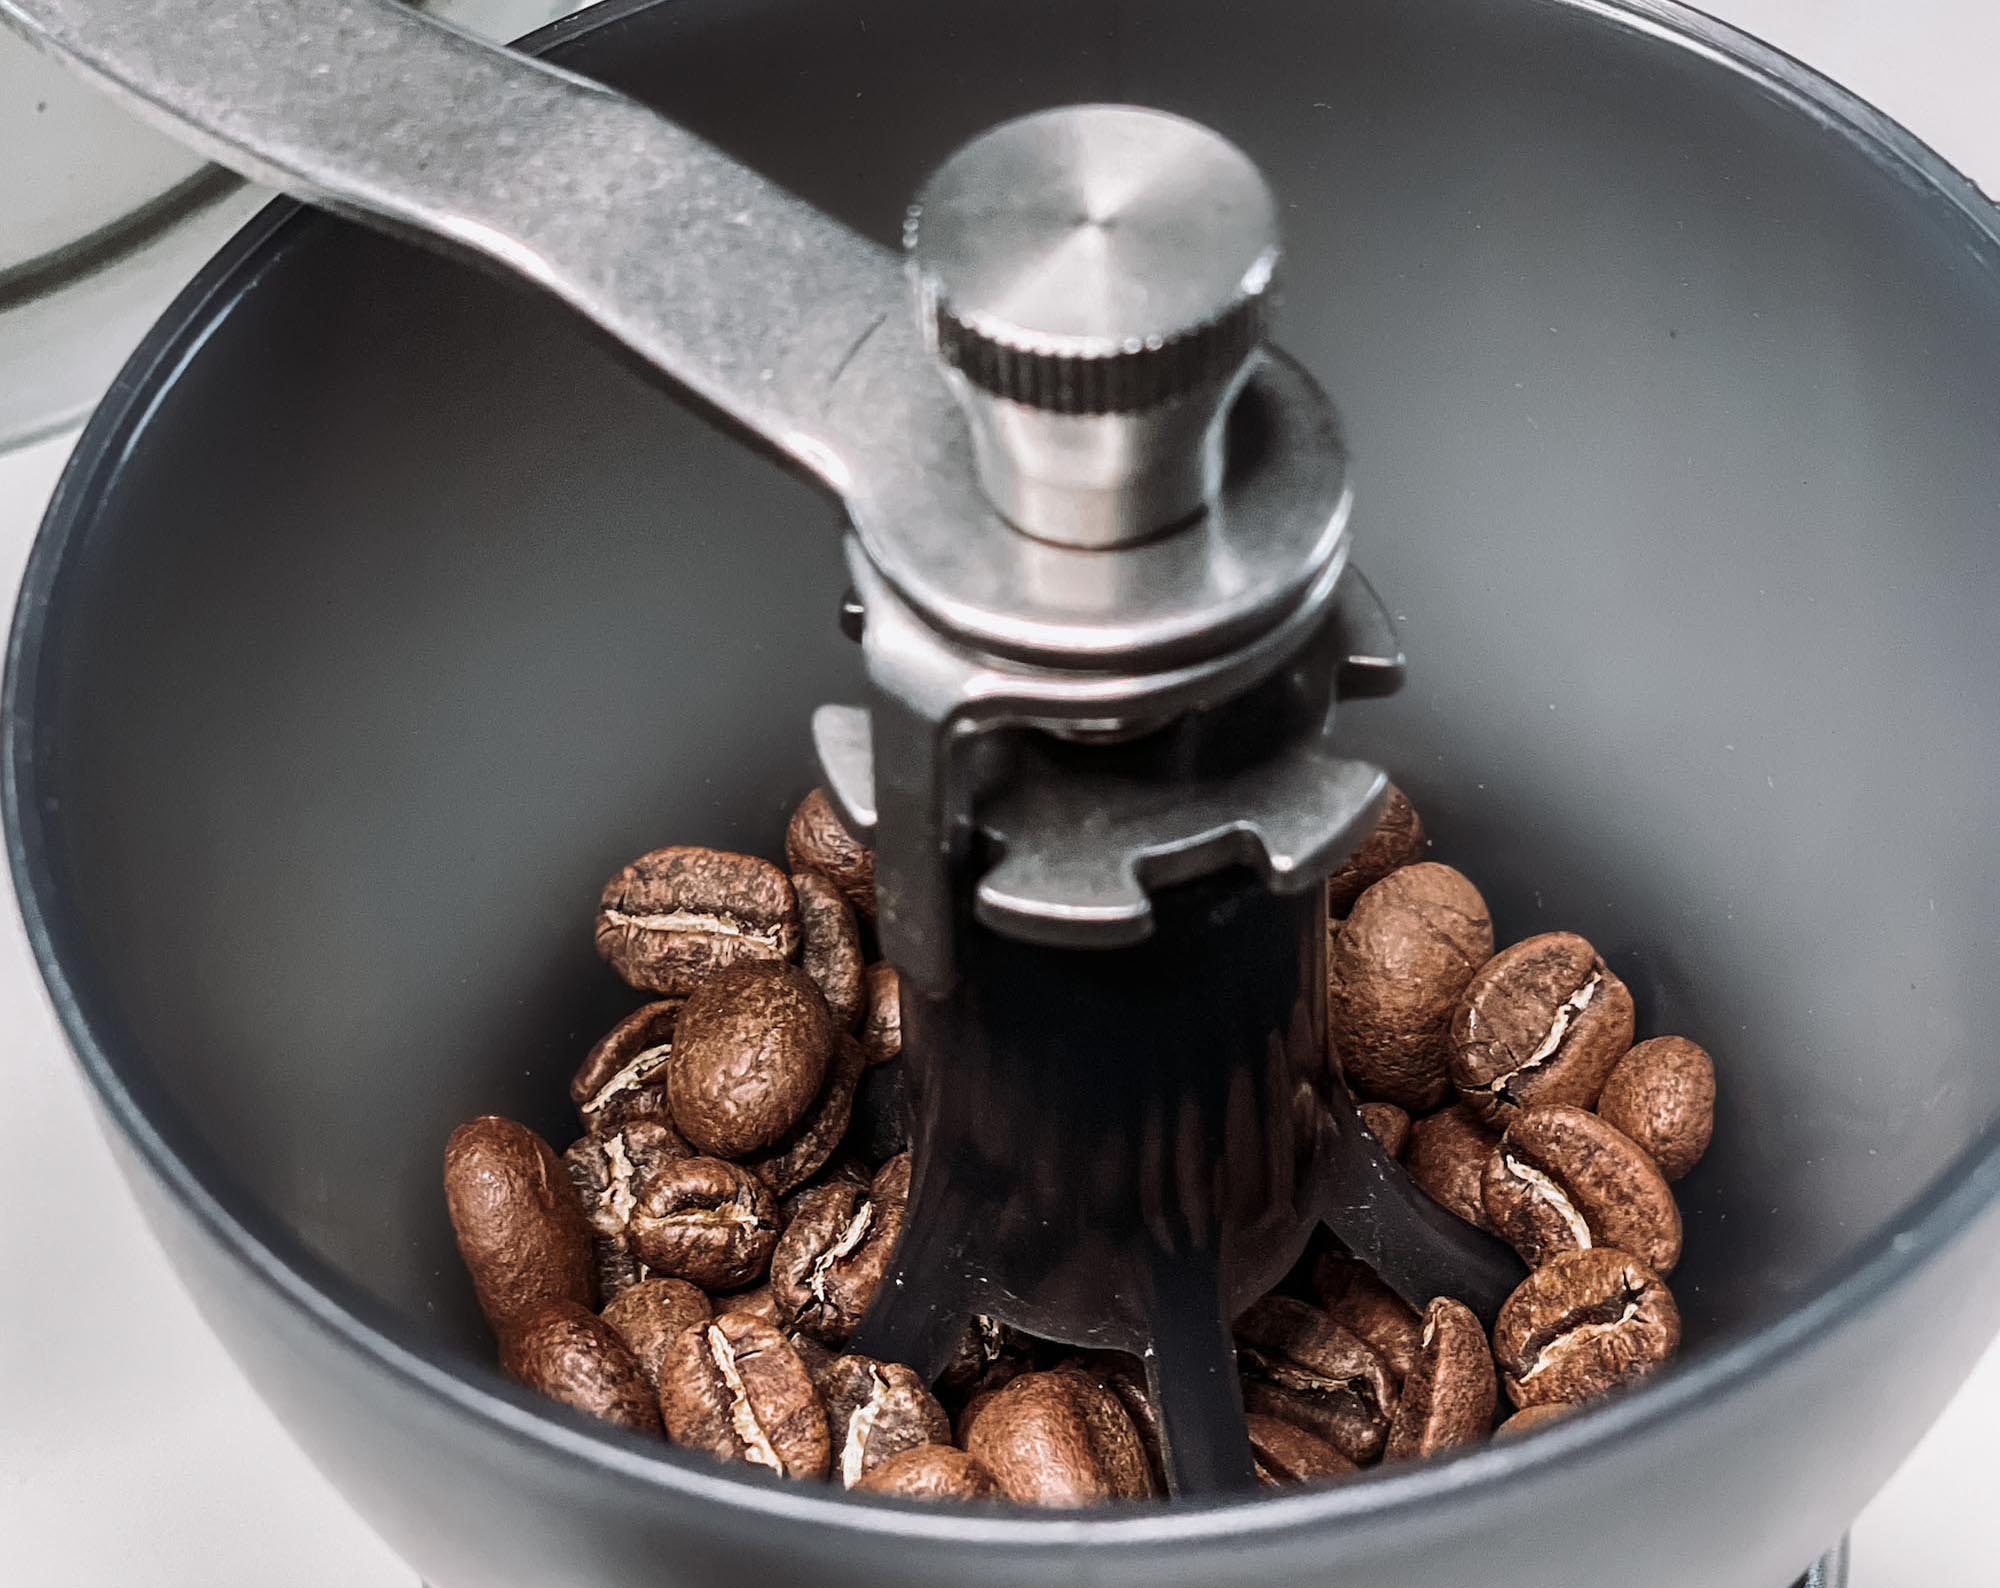 up close image of a manual coffee grinder